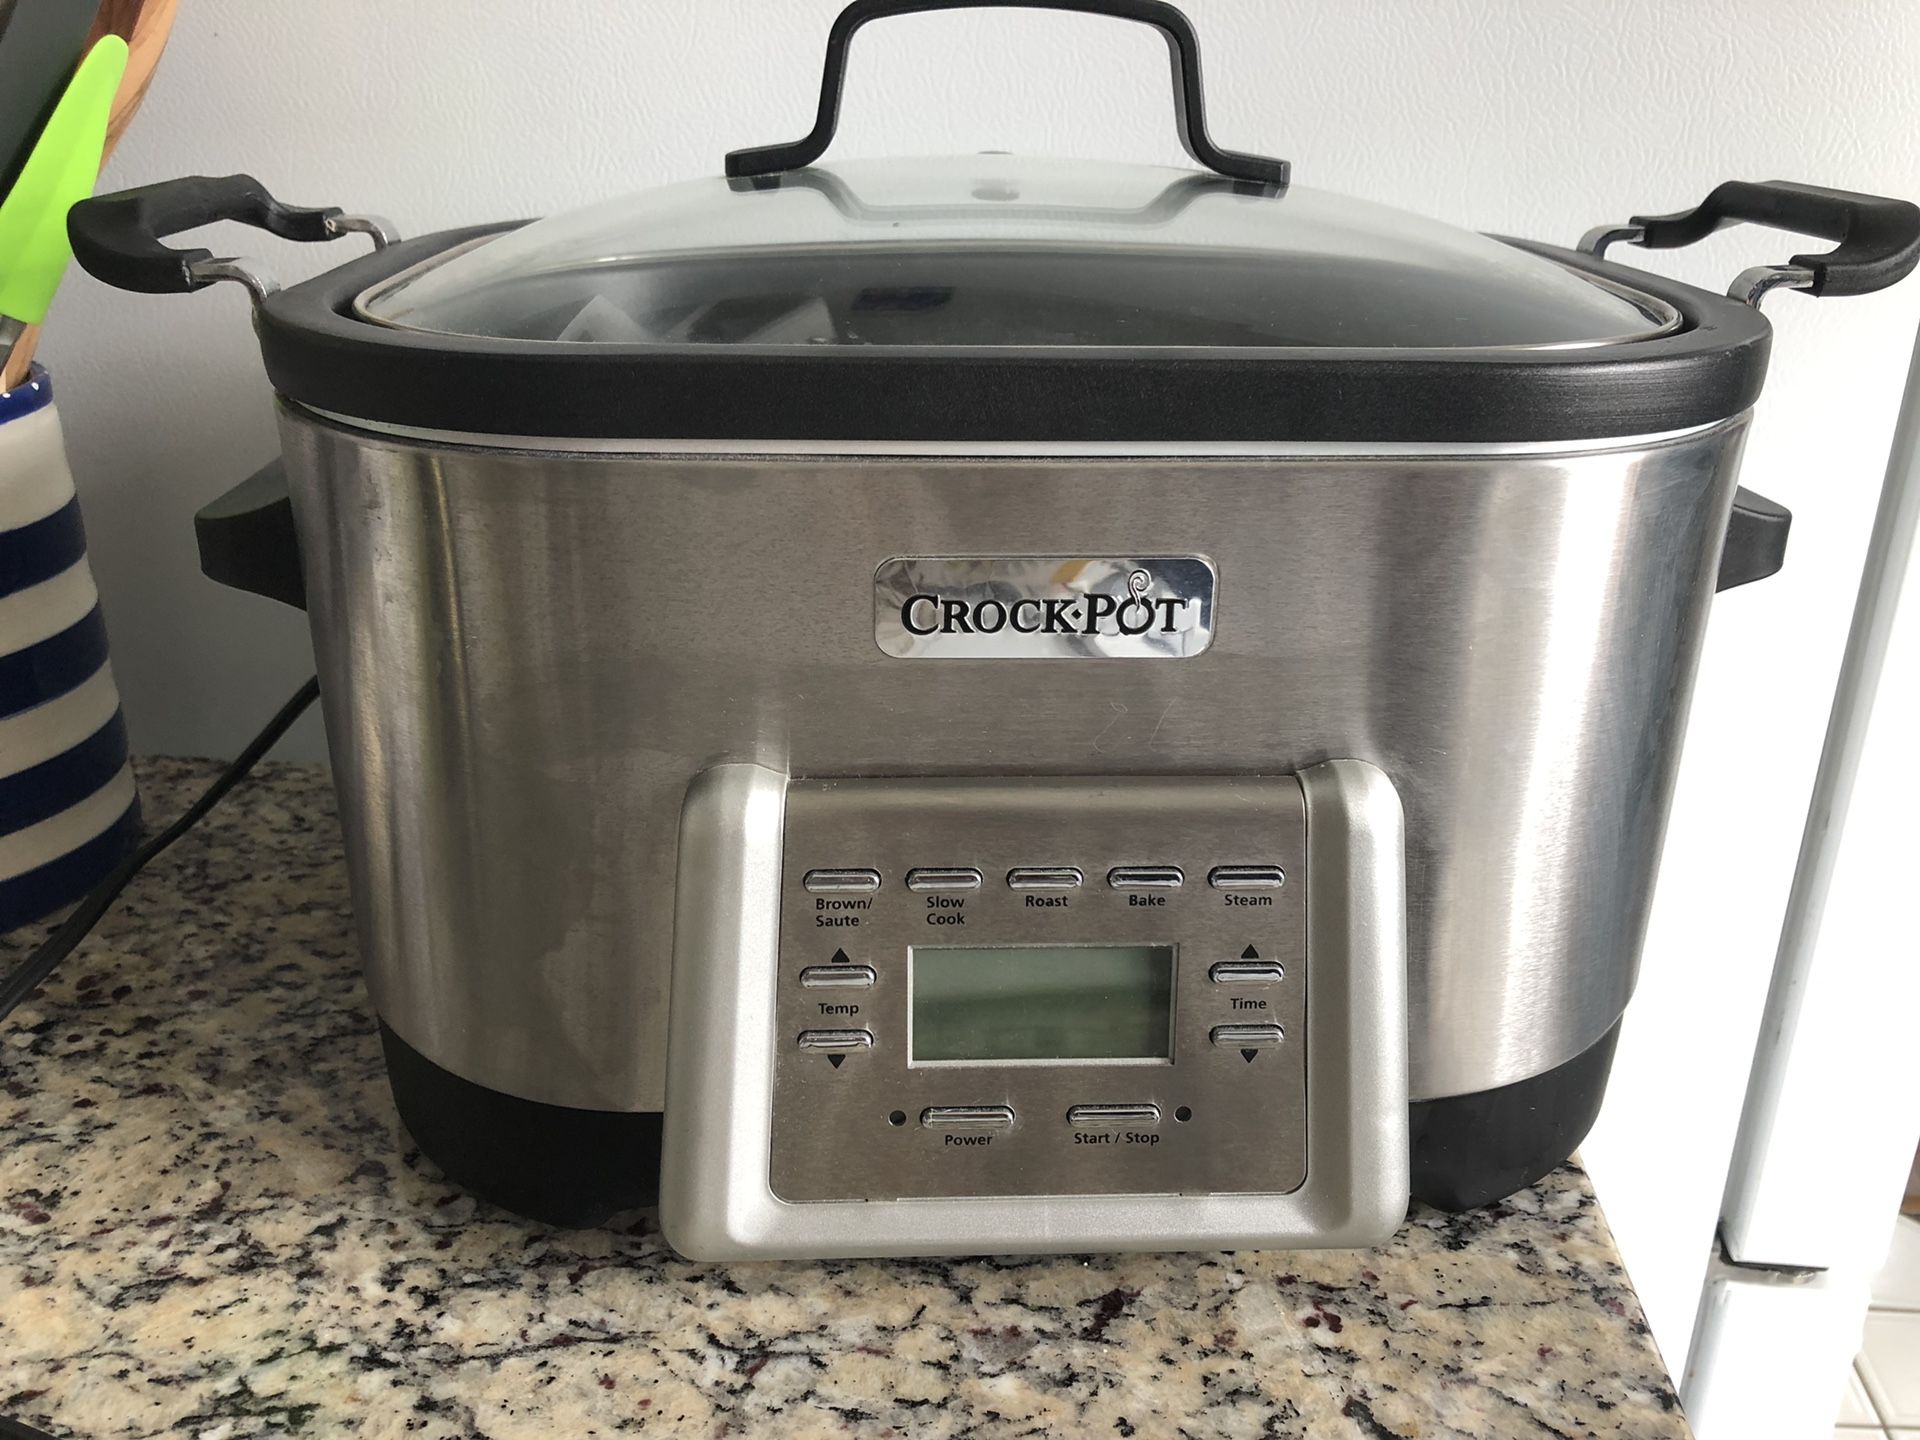 Crock Pot 6-Quart 5 in 1 multi cooker with non-stick inner pot, stainless steel